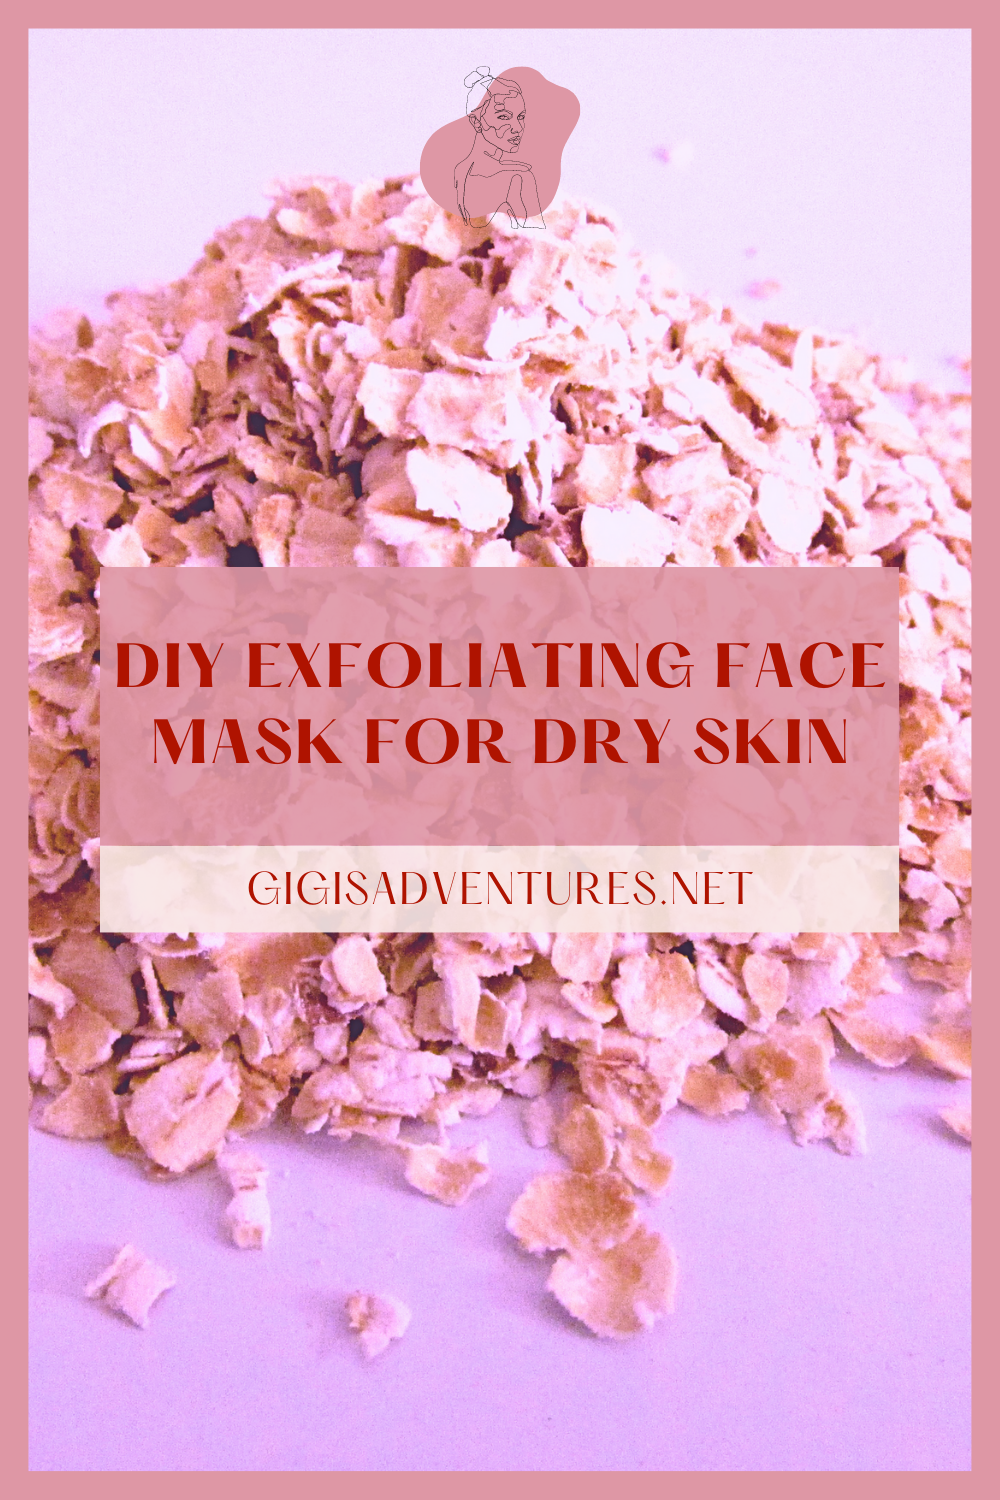 DIY Exfoliating Face Mask for Dry Skin with 3 Ingredients